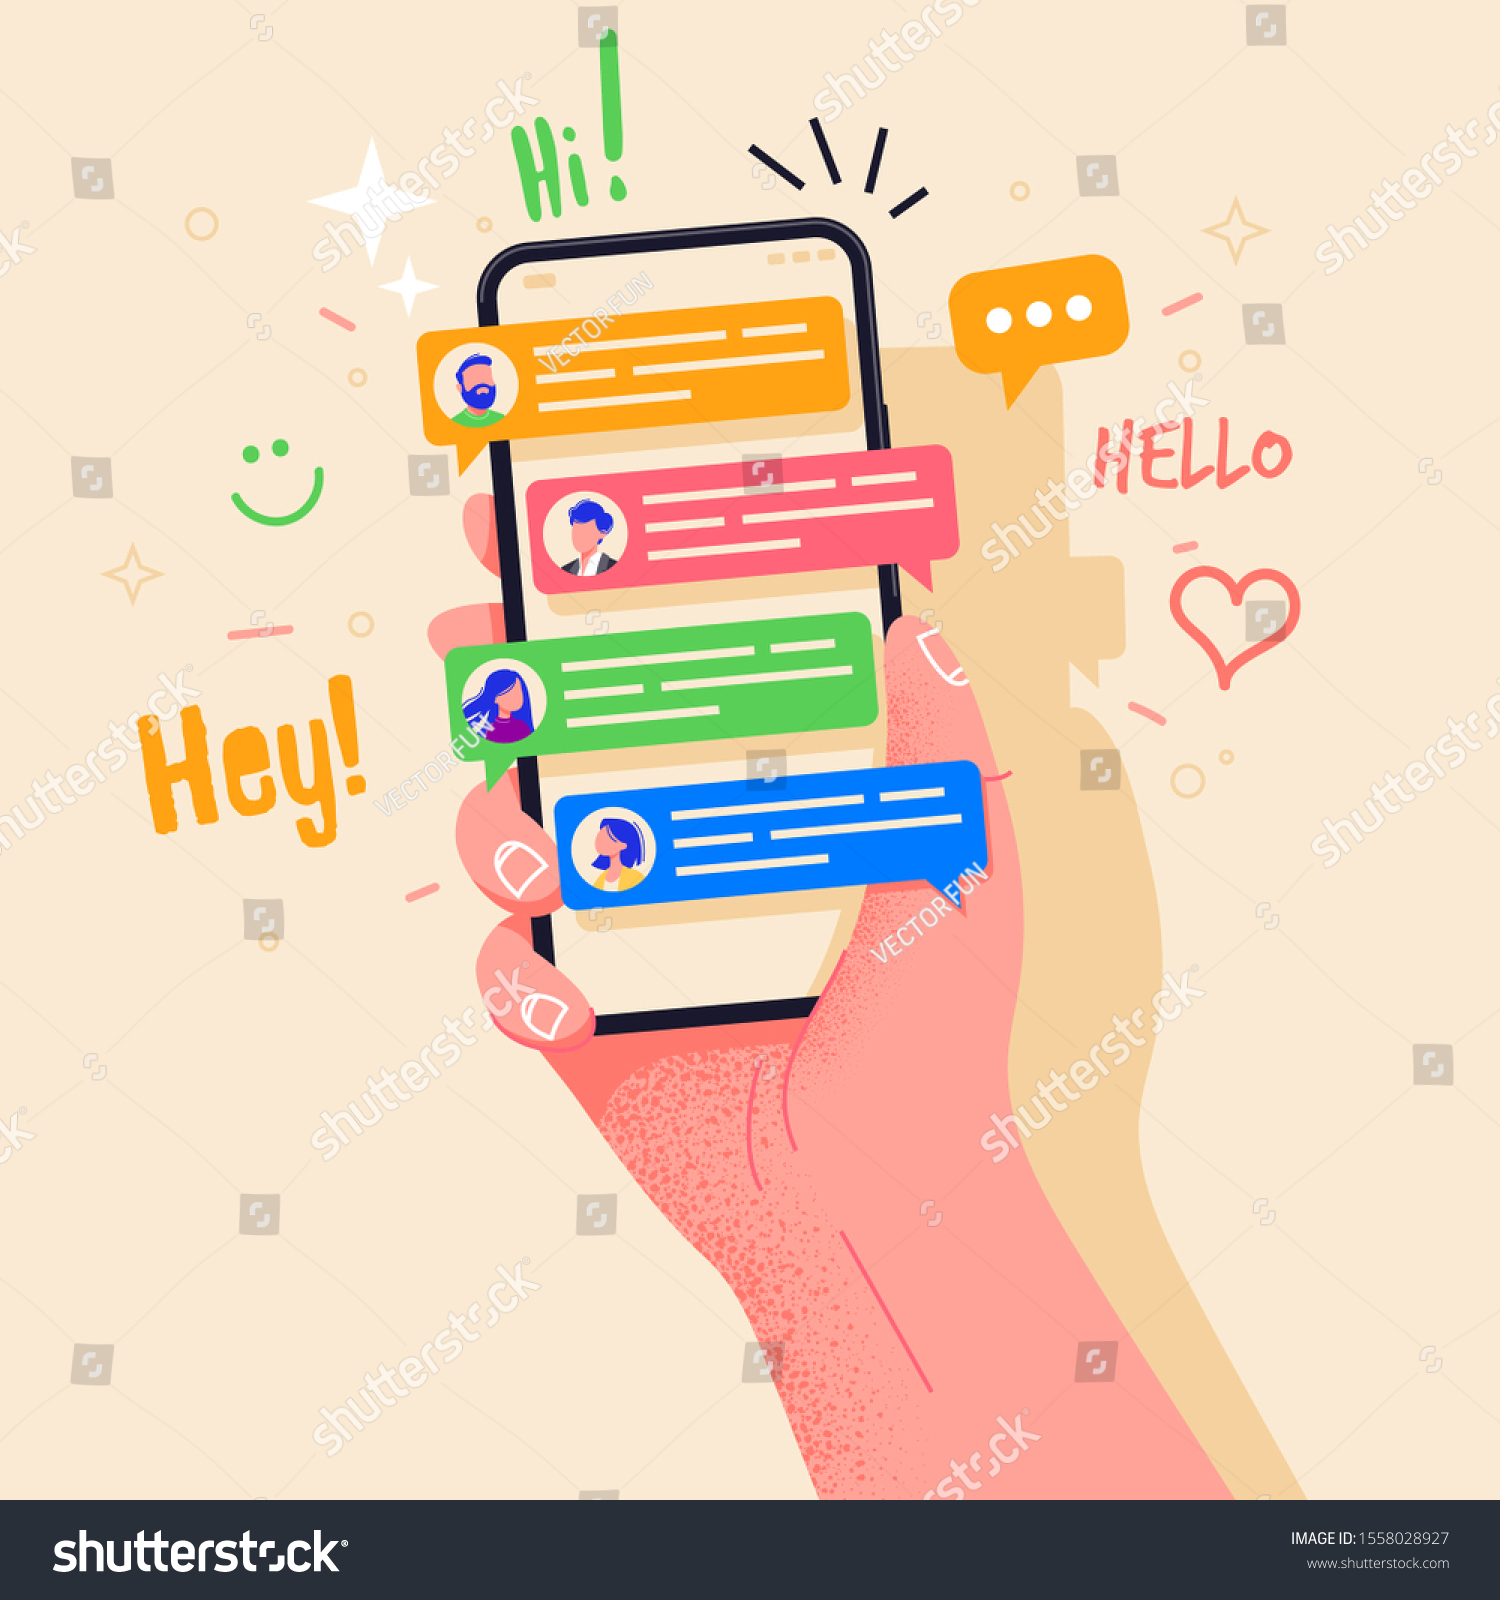 Hand holding phone with short messages, icons and emoticons. Chatting with friends and sending new messages. Colorful speech bubbles boxes on smartphone screen flat design vector illustration. #1558028927